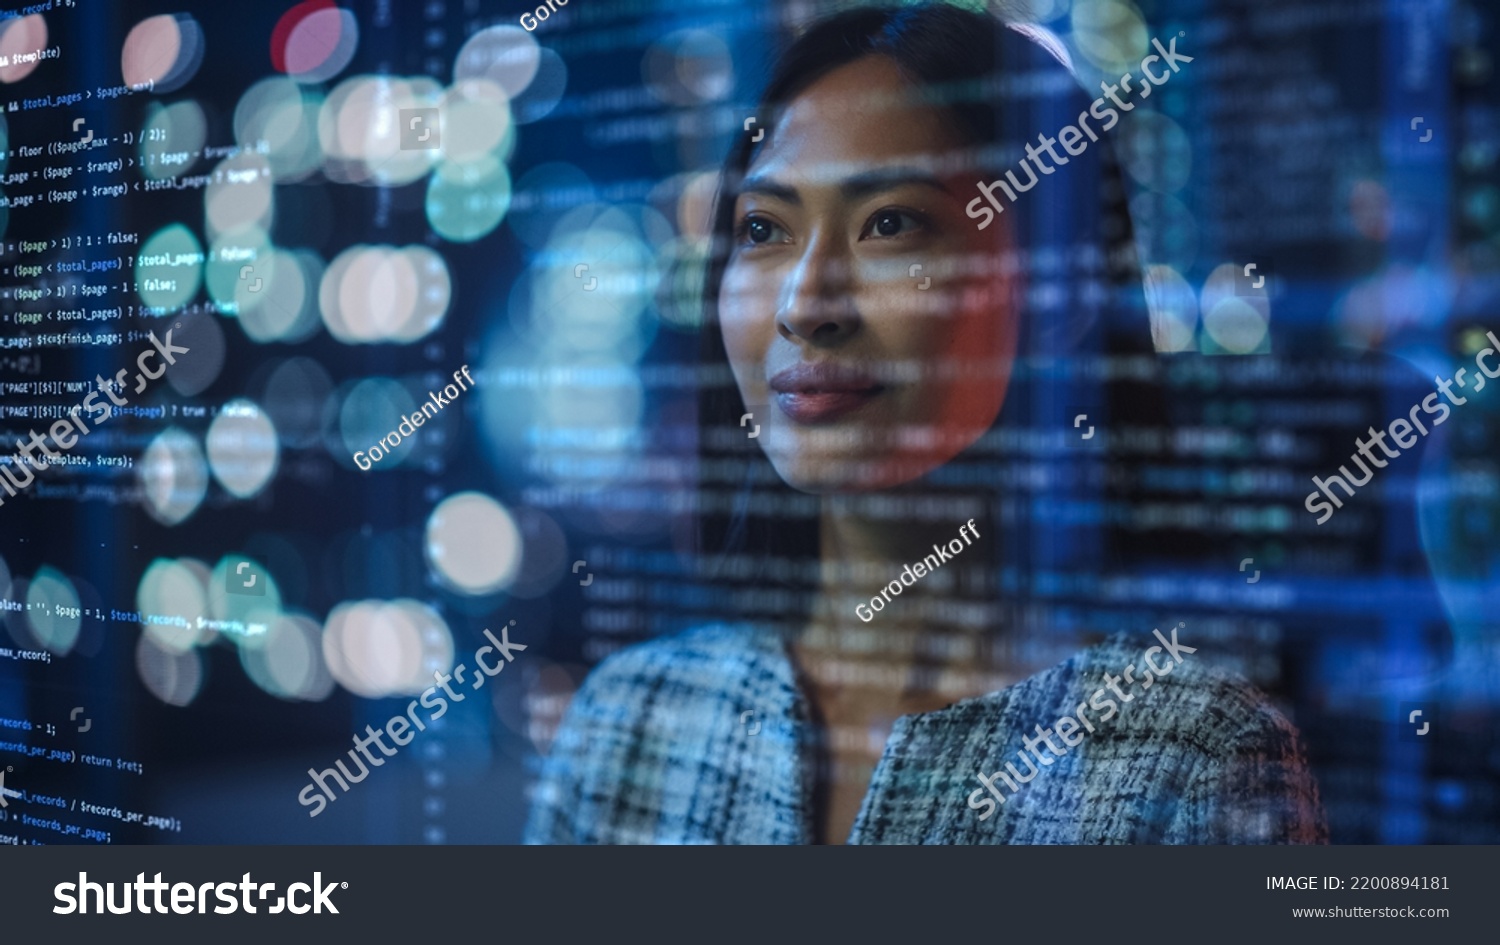 Portrait of Asian Female Startup Digital Entrepreneur Working on Computer, Line of Code Projected on Her Face and Reflecting. Software Developer Working on Innovative e-Commerce App using AI, Big Data #2200894181